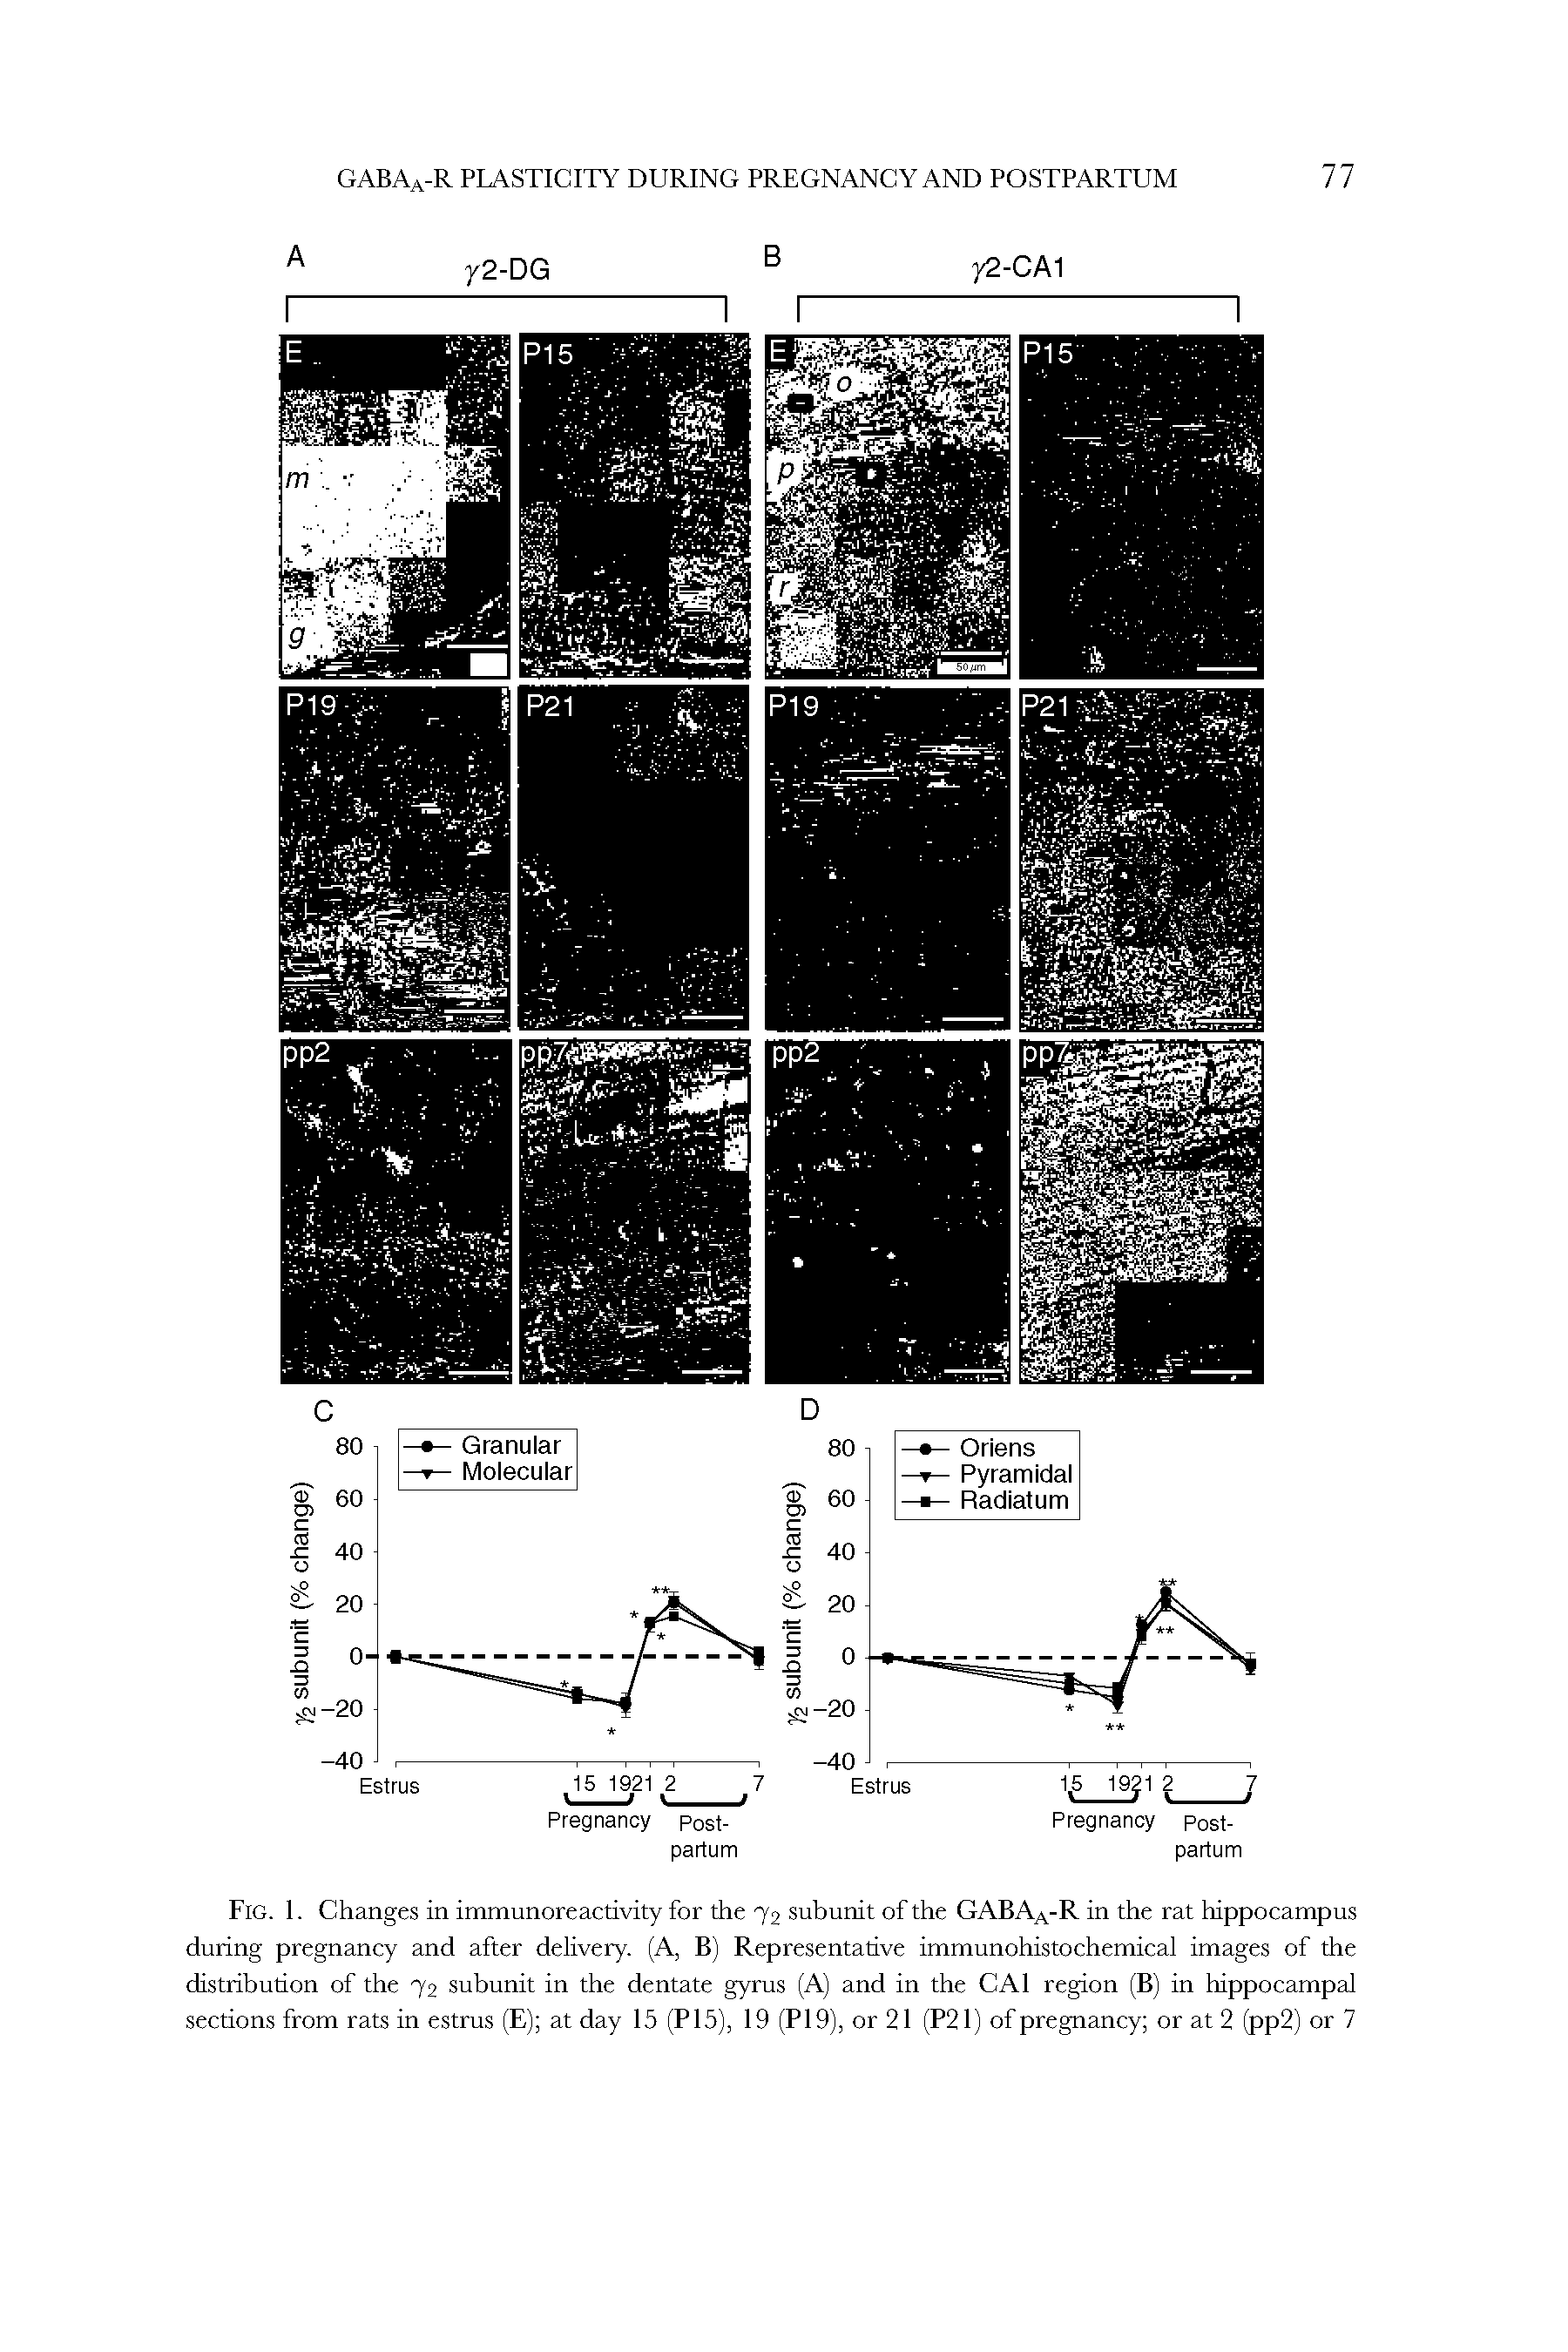 Fig. 1. Changes in immunoreactivity for the 72 subunit of the GABAa-R in the rat hippocampus during pregnancy and after delivery. (A, B) Representative immunohistochemical images of the distribution of the 72 subunit in the dentate gyrus (A) and in the CA1 region (B) in hippocampal sections from rats in estrus (E) at day 15 (P15), 19 (PI 9), or 21 (P21) of pregnancy or at 2 (pp2) or 7...